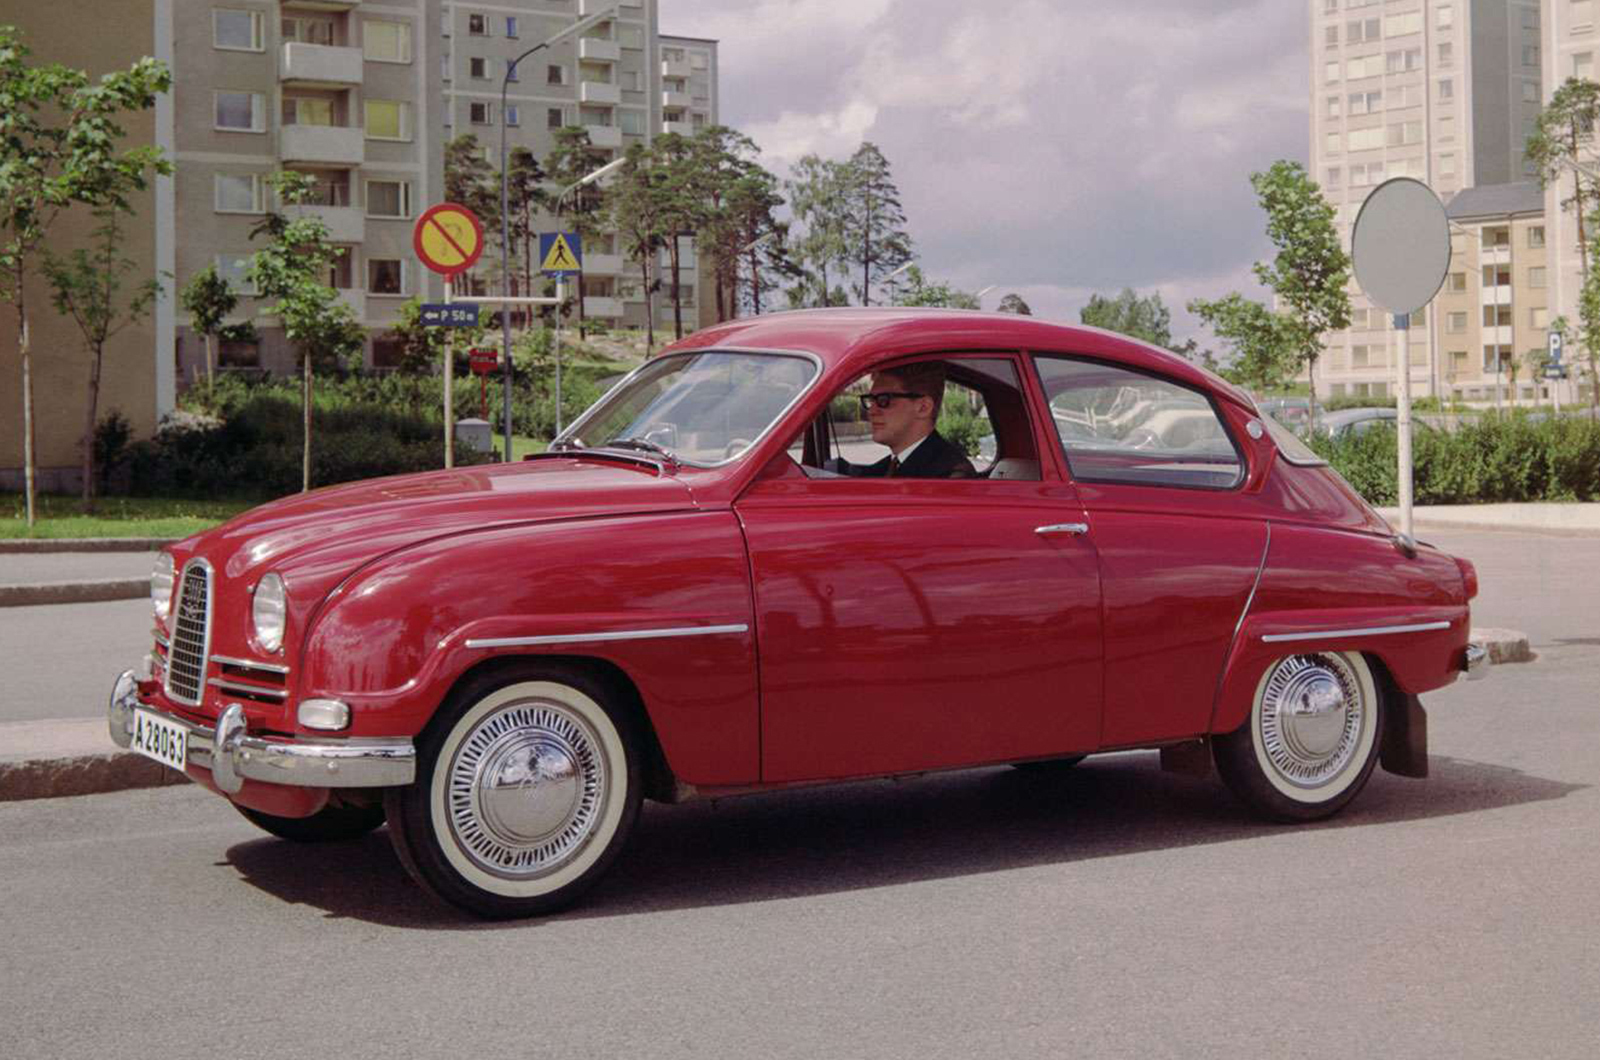 The Story Of The Saab GT 750